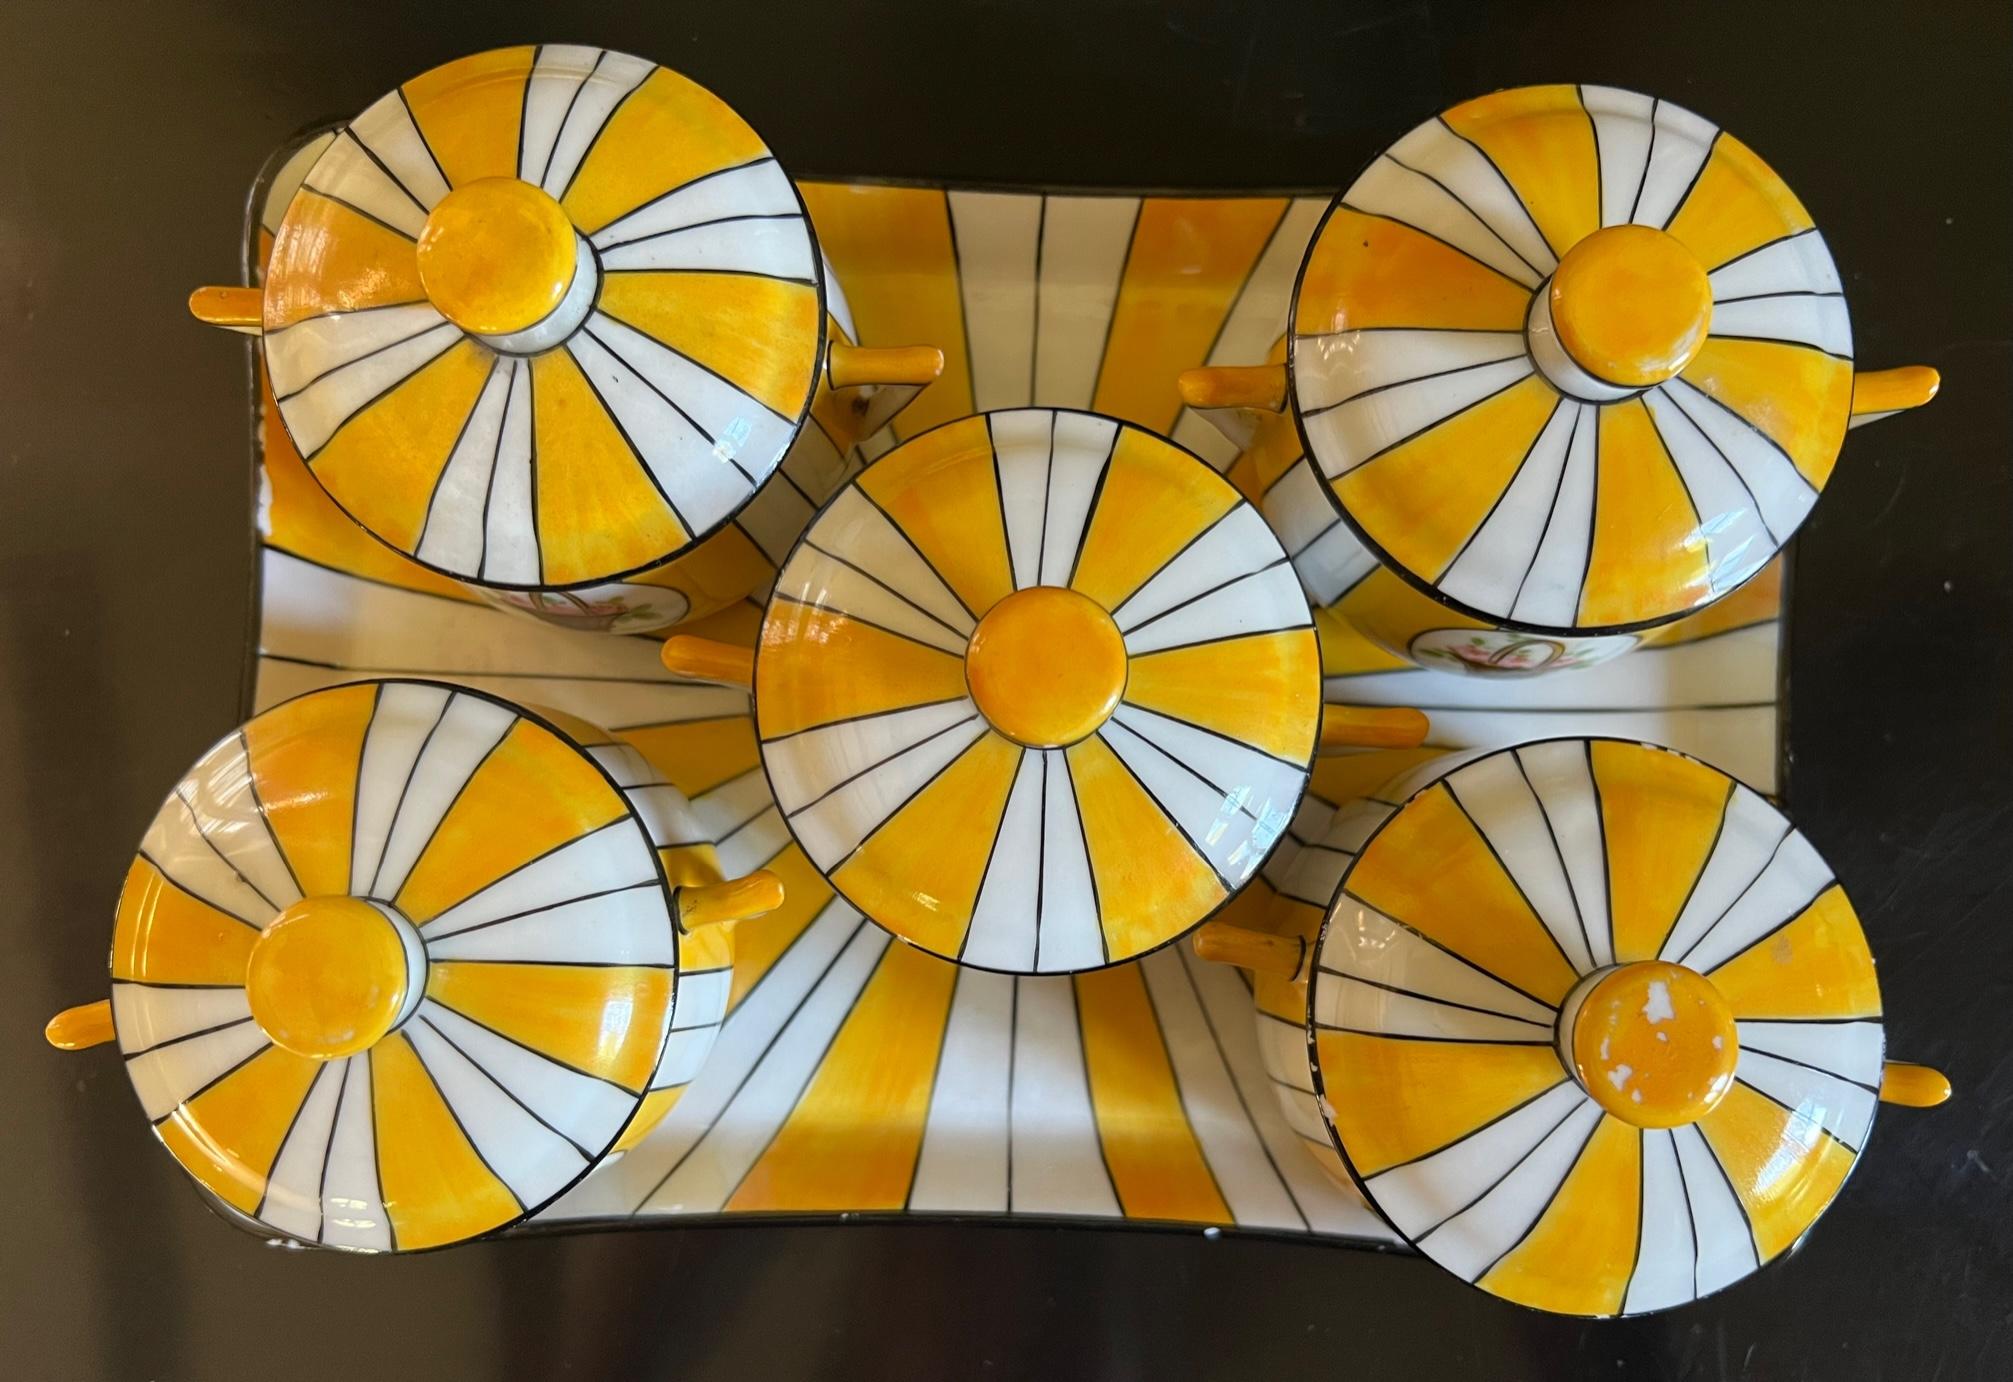 Vintage yellow and white striped cream pot set made around 1960 in Limoges, France. This set would typically used in France for desserts such as chocolate, mousse or custard.

Tray: 9.25 wide by 6.5 wide
Each pot with lid 2.75 tall, 4 inches across